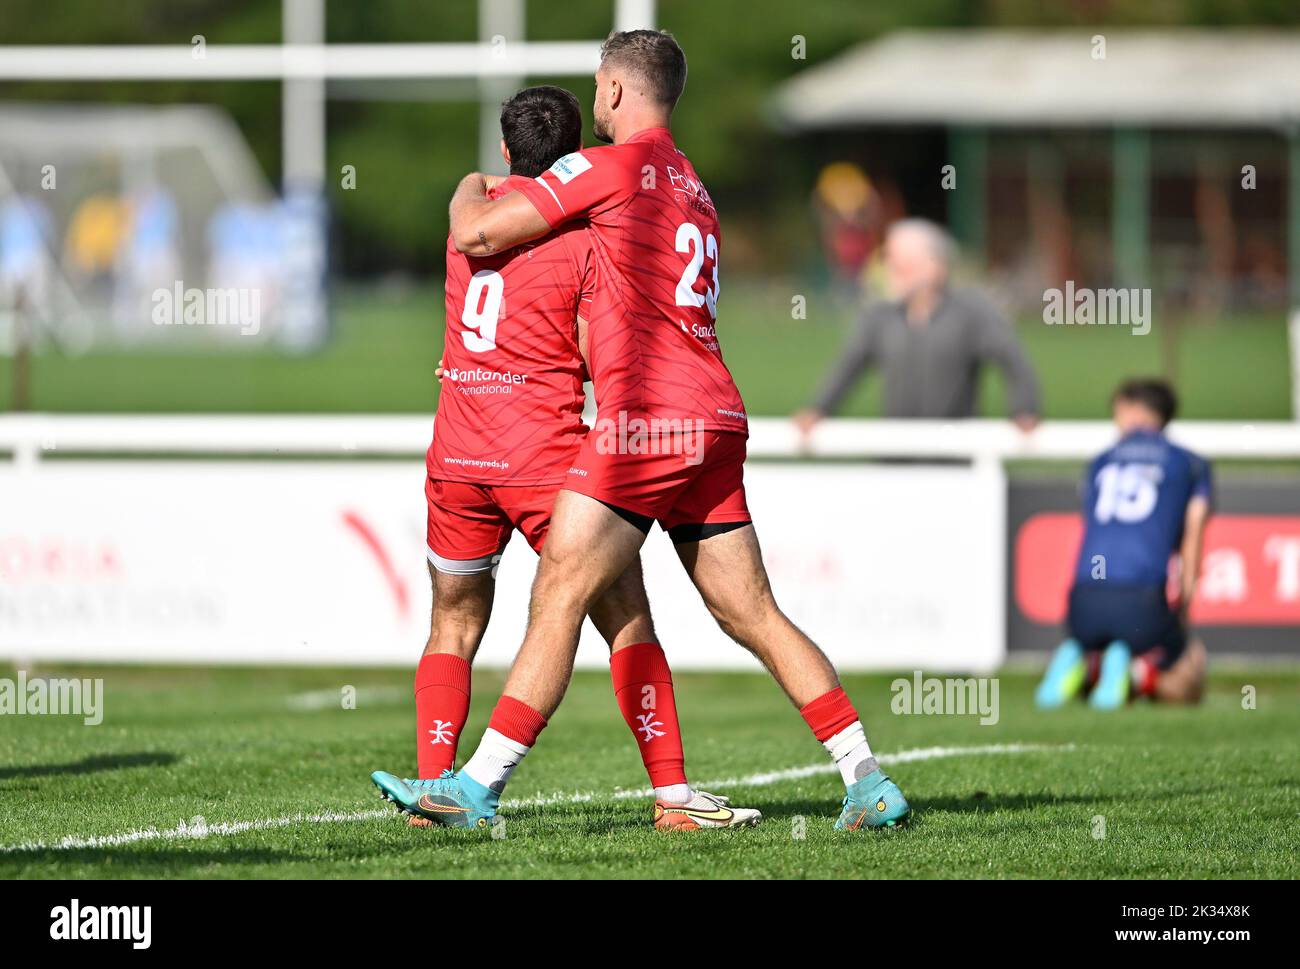 Richmond, United Kingdom. 24th Sep, 2022. Championship Rugby. London Scottish V Jersey Reds. The Richmond Athletic Ground. Richmond. Try scorer James Elliot (Jersey Reds, 9) is congratulated by Brendan Owen (Jersey Reds) during the London Scottish V Jersey Reds championship rugby match. Credit: Sport In Pictures/Alamy Live News Stock Photo